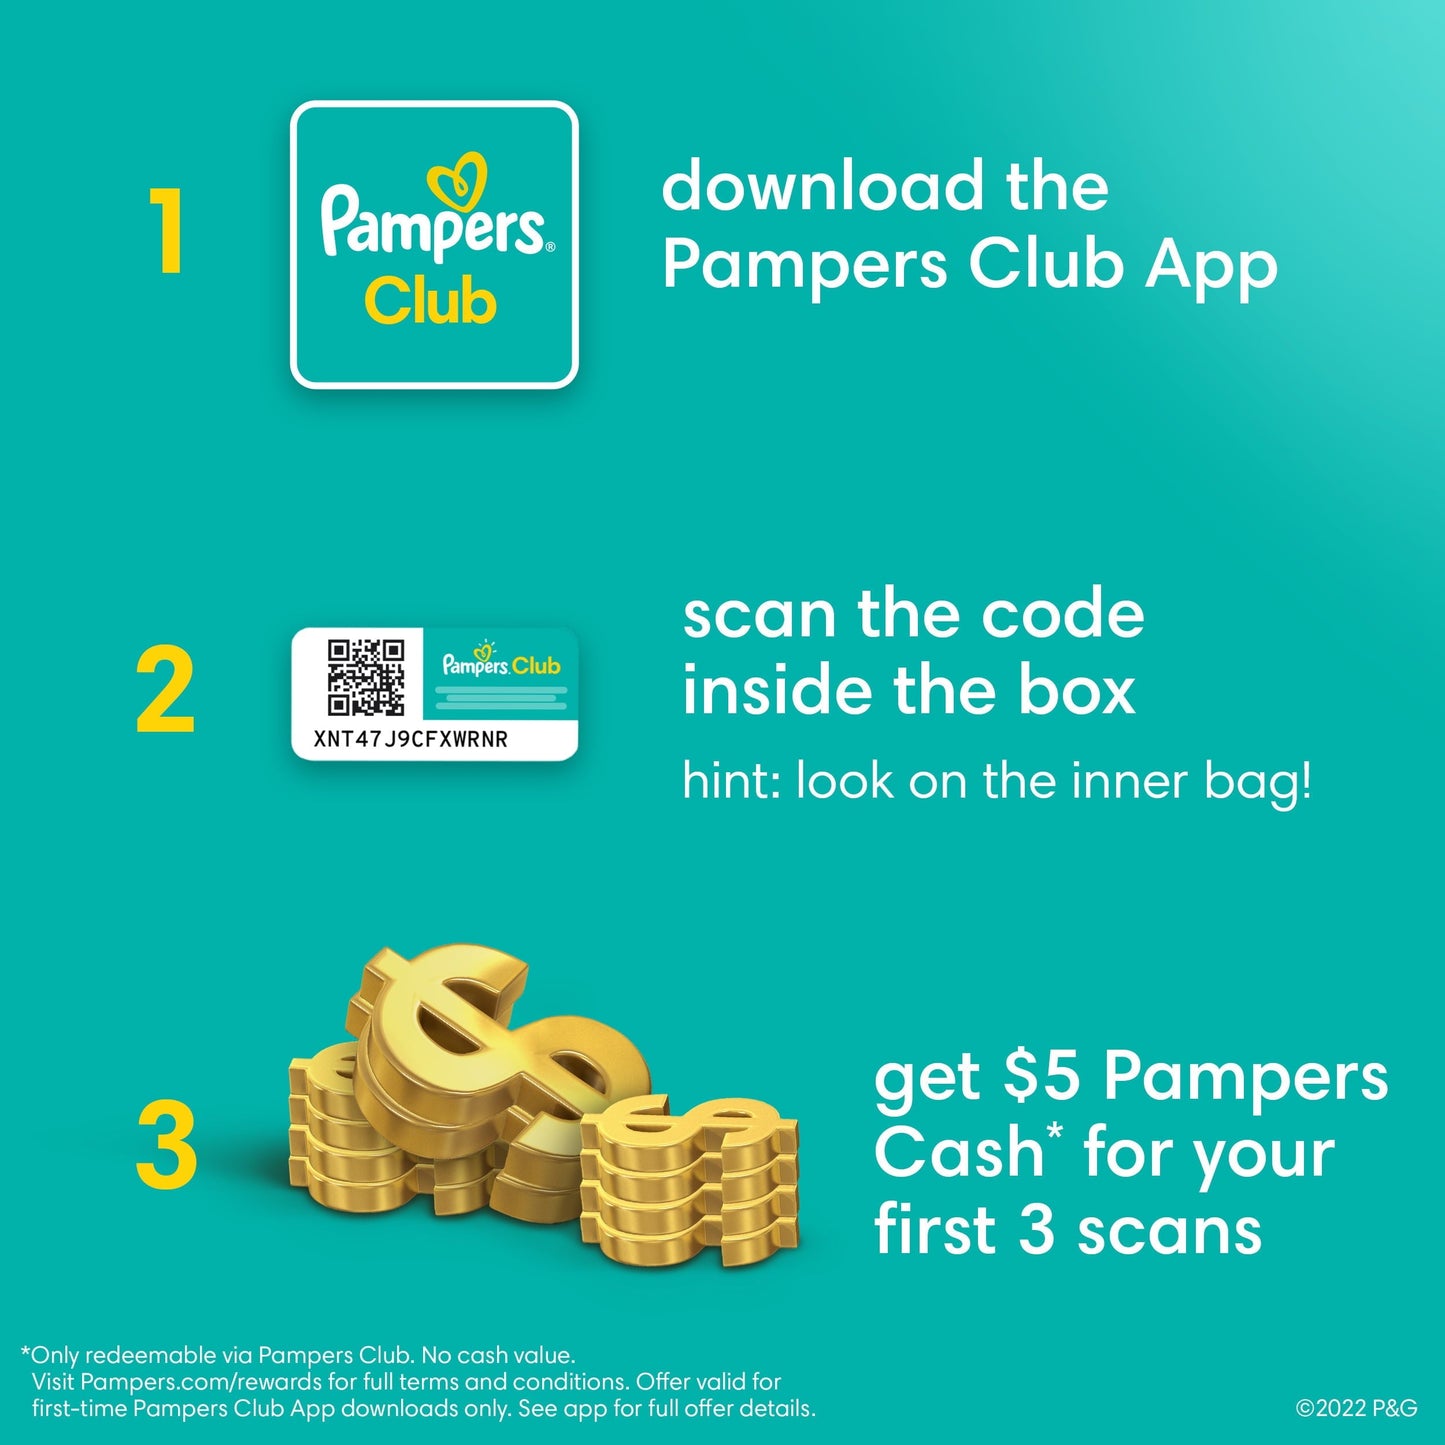 Pampers Baby Dry Diapers Size 5, 78 Count